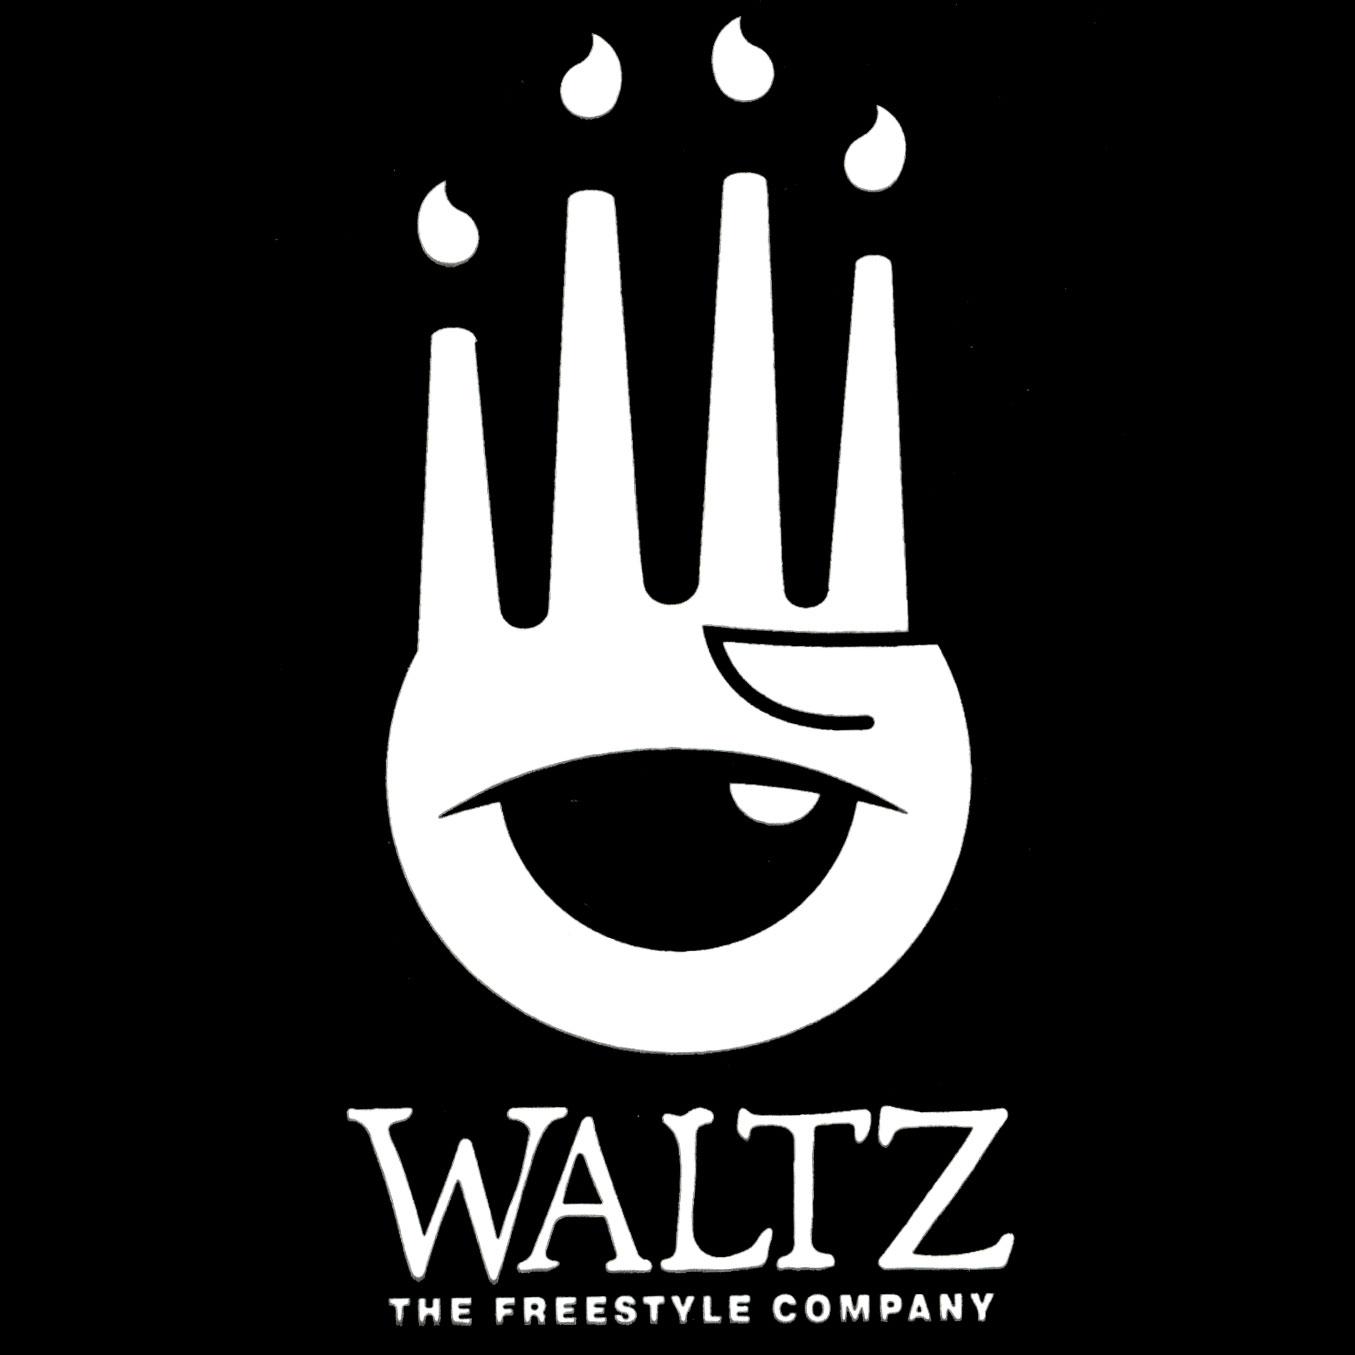 See Skateboard products from Waltz The Freestyle Company